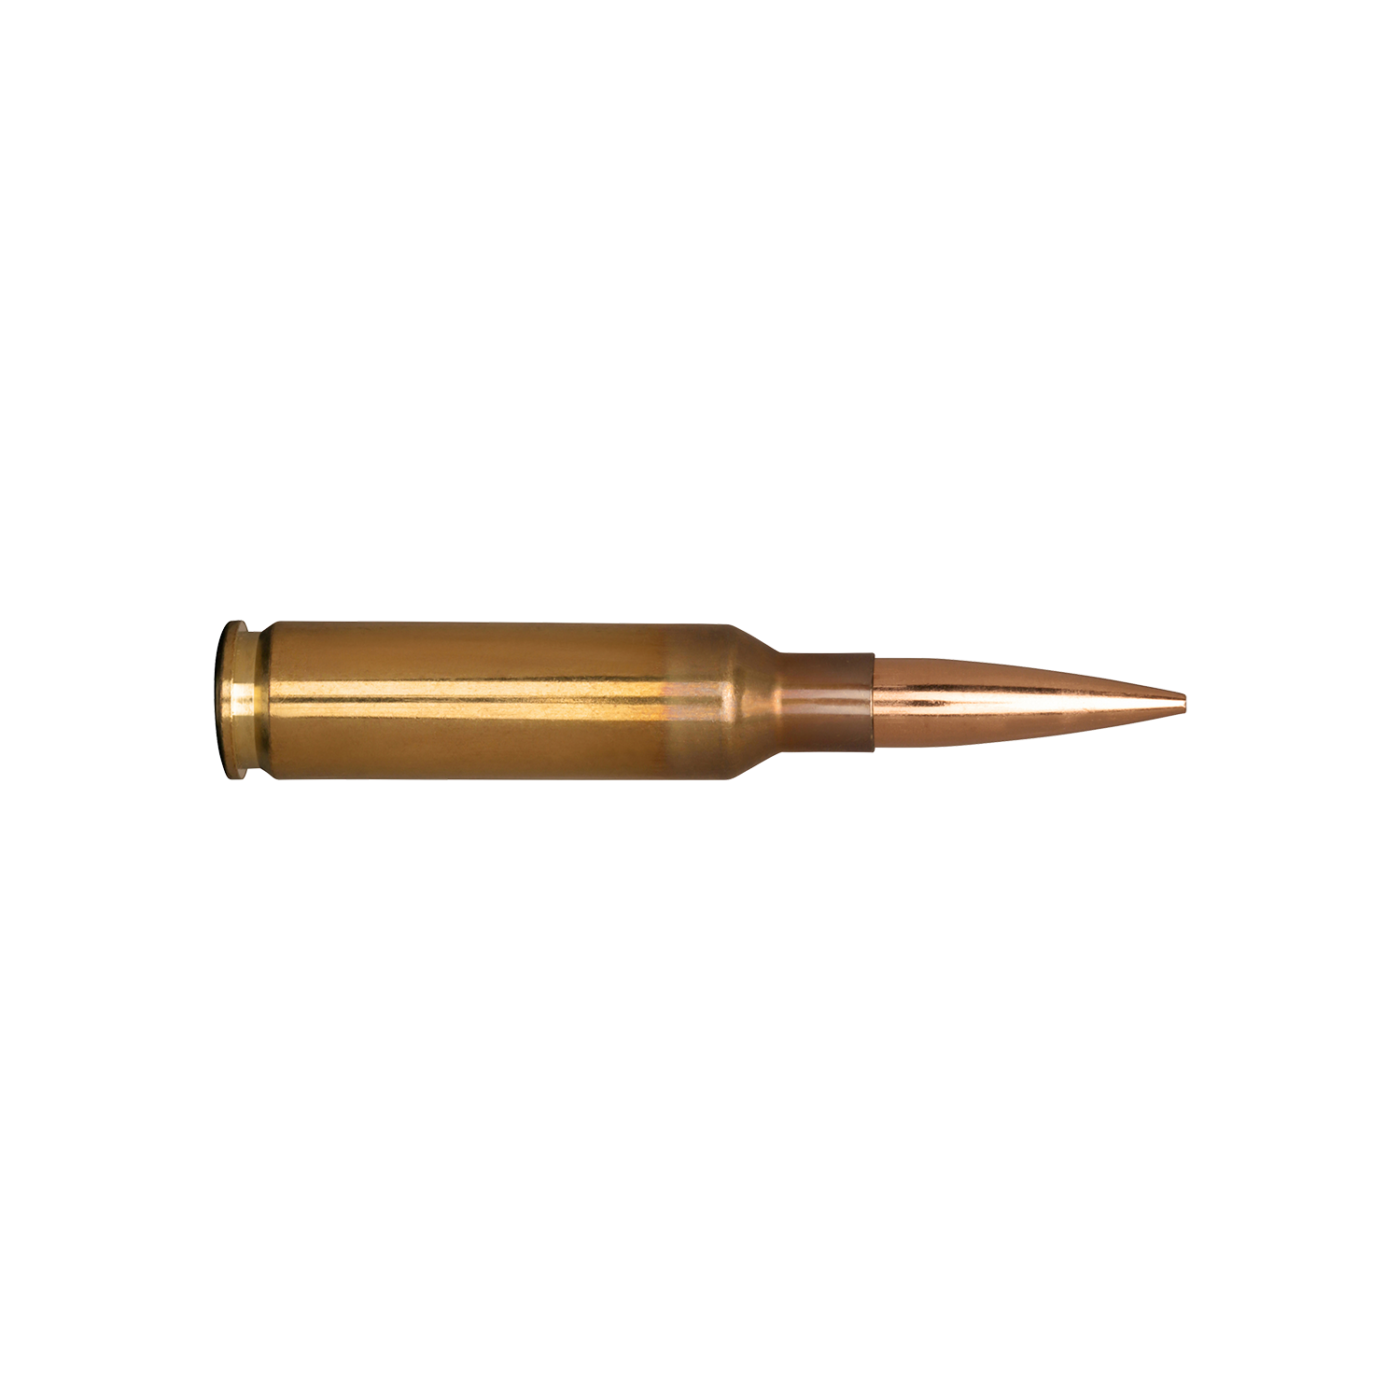 What Does Grain Mean in Ammo?